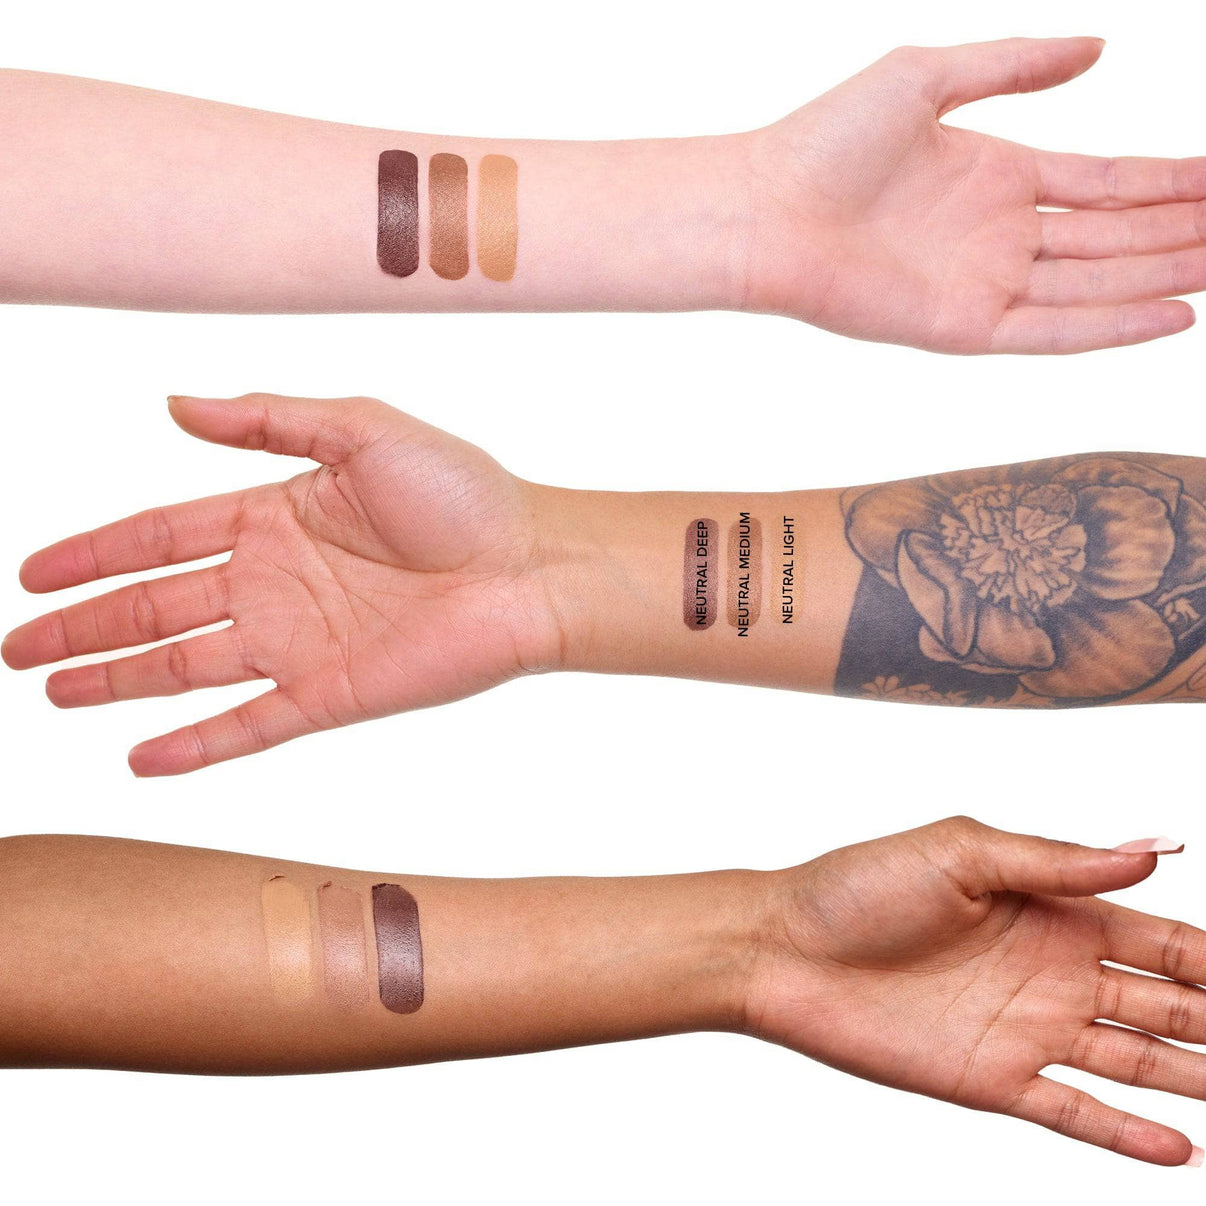 Arms with swatches of Tinted Blur Sculpt Stick deep